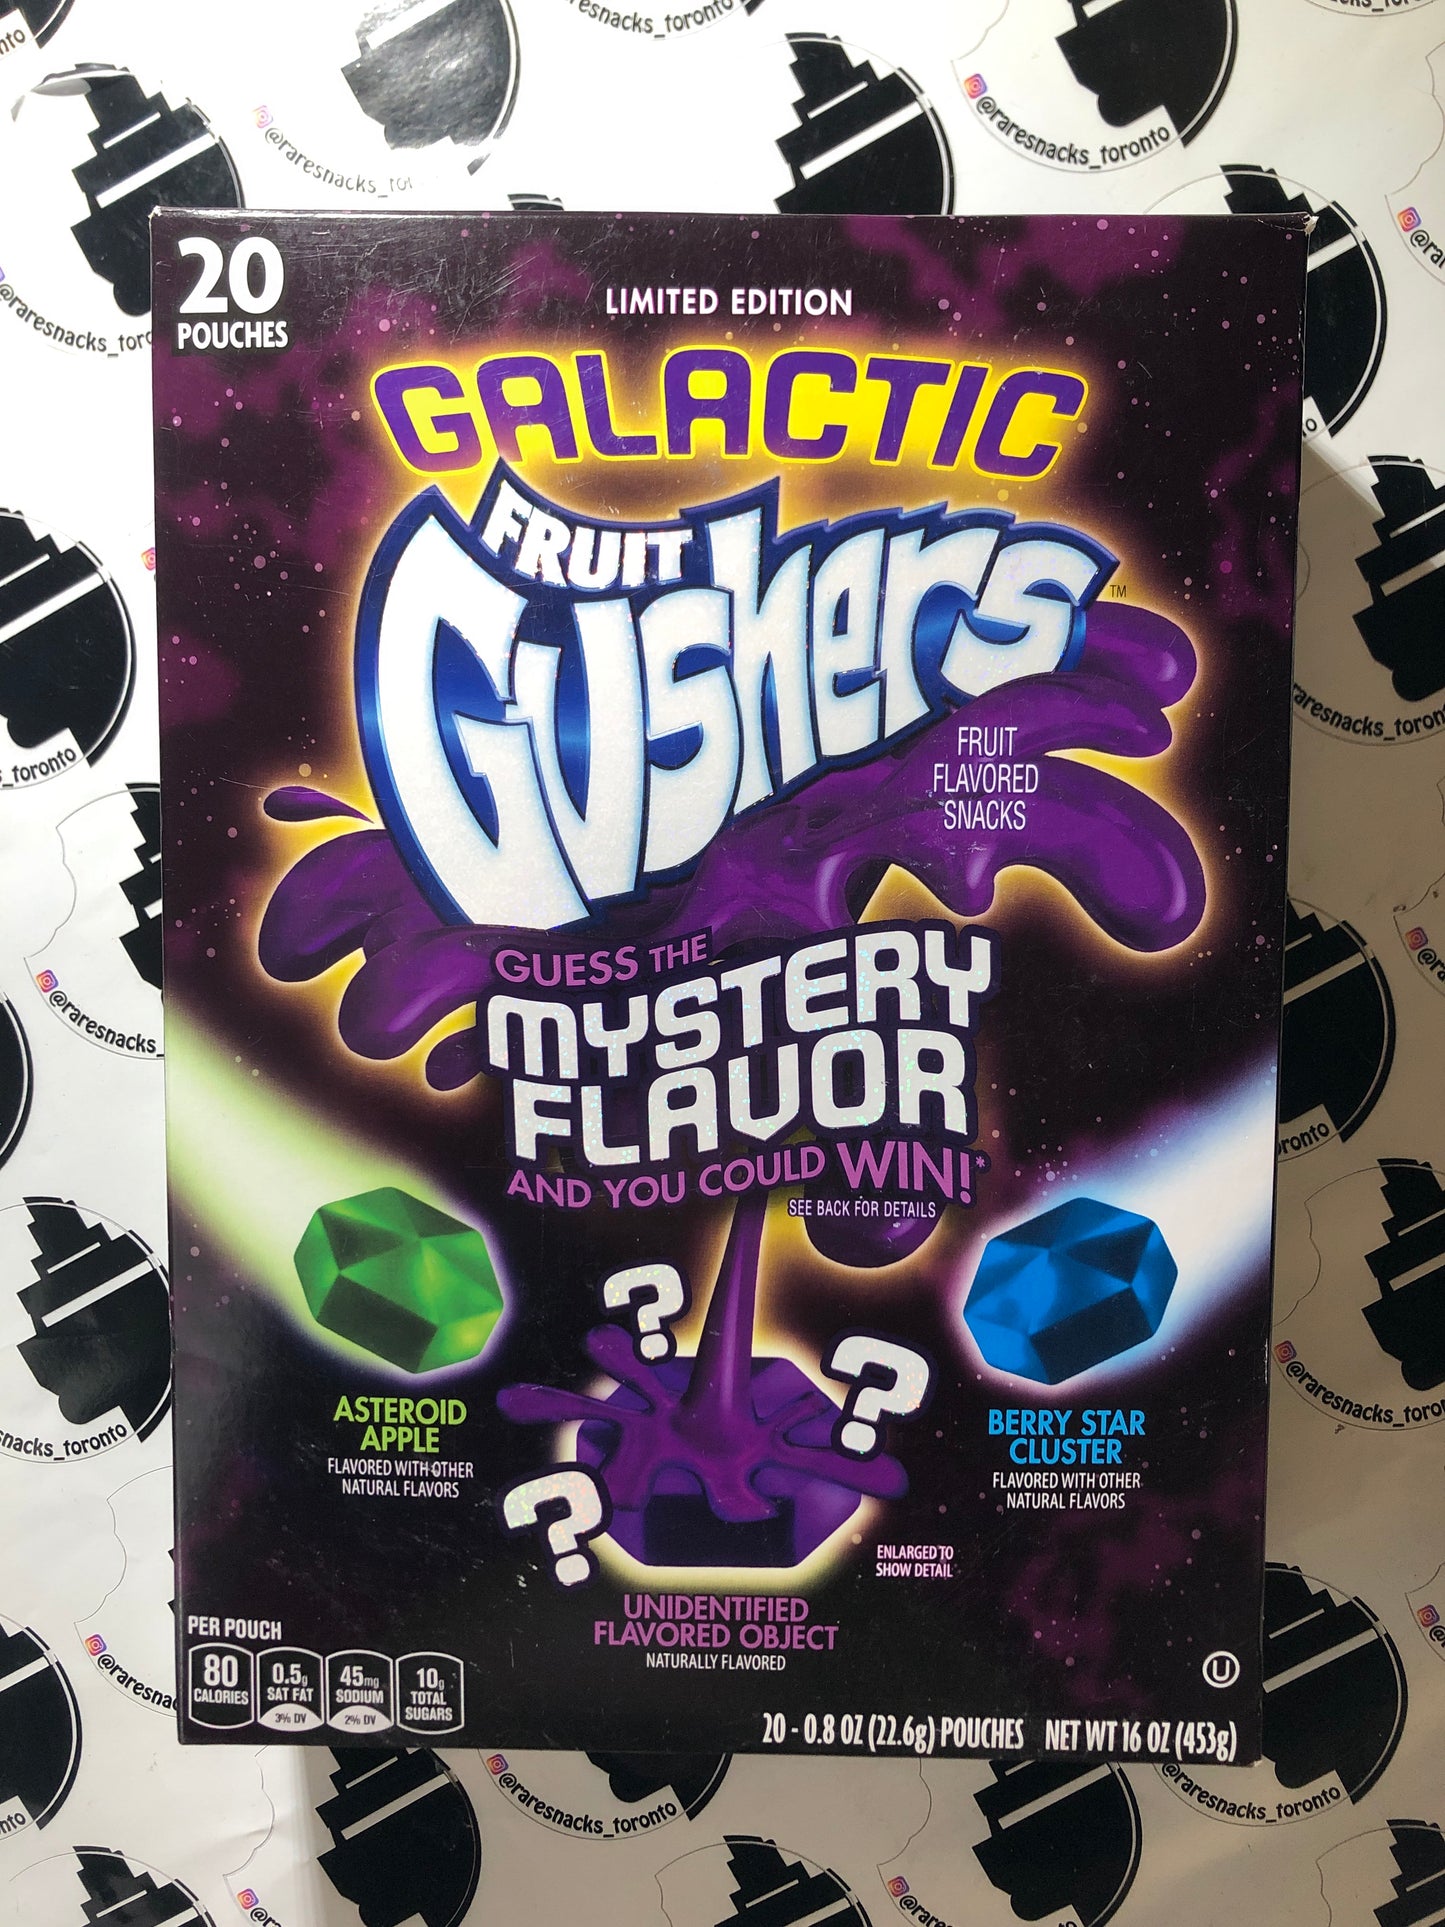 Fruit Gushers Galactic Limited Edition 20Pk